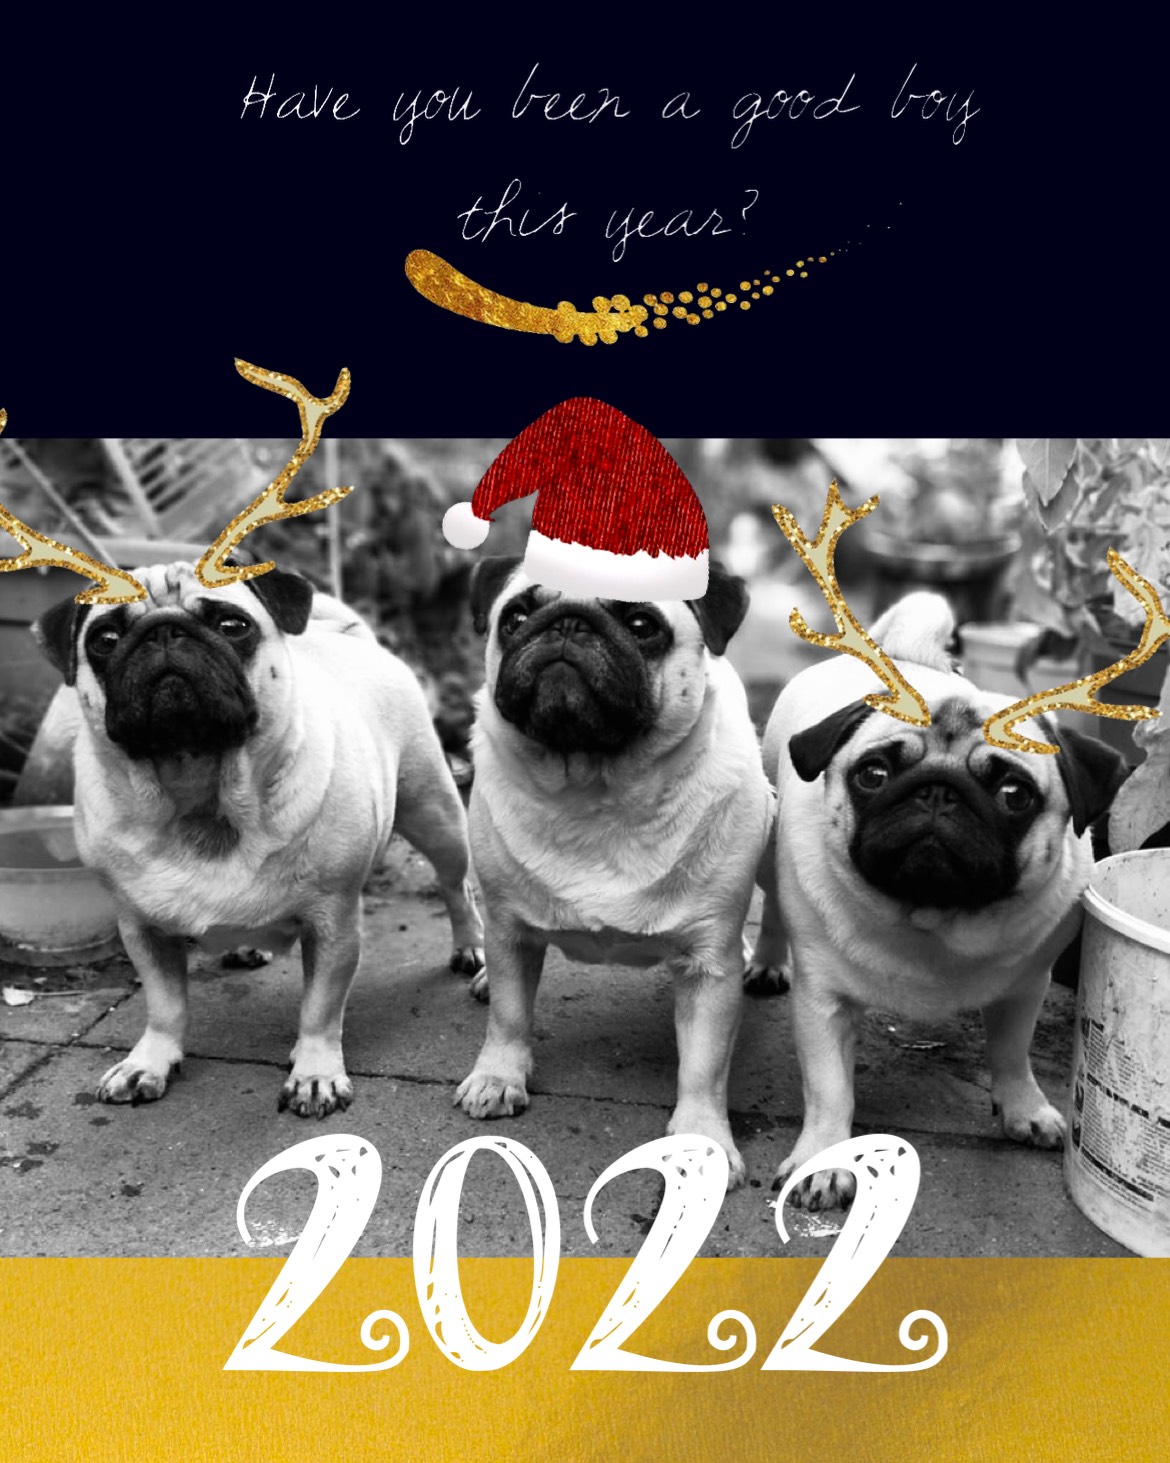 A Group Of Pug Dogs Wearing Christmas Hats Merry Christmas Template